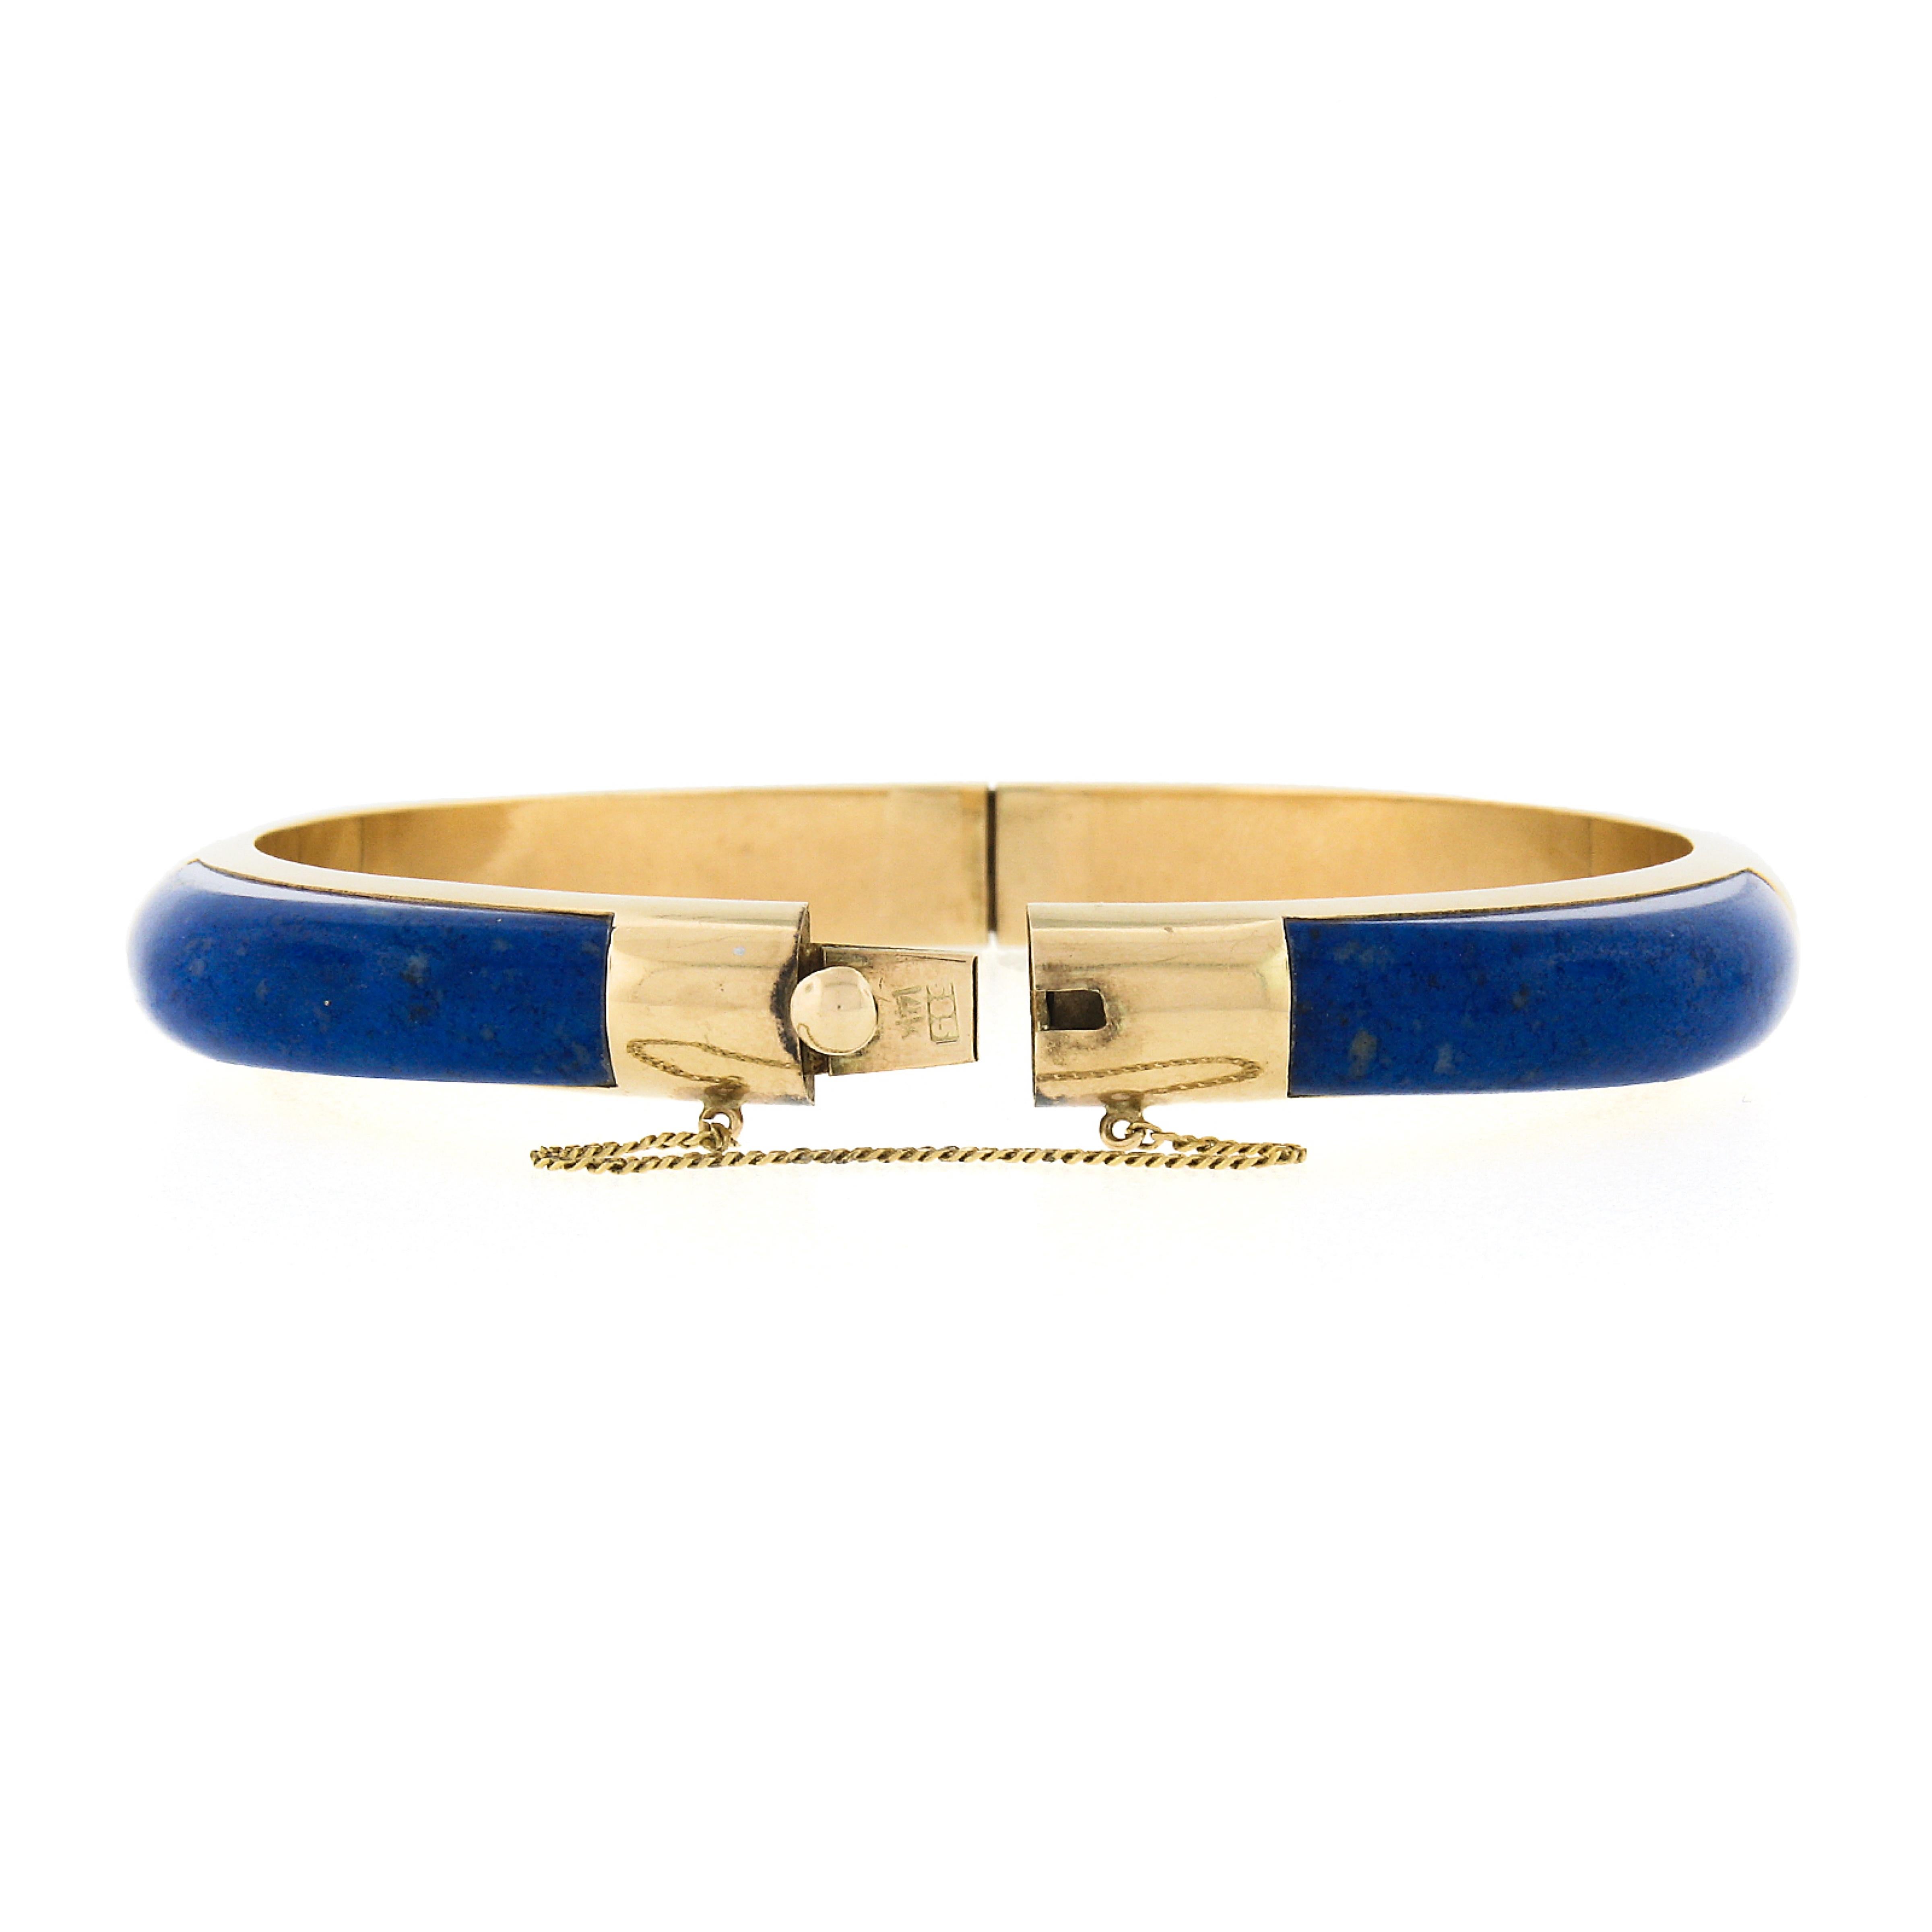 This beautiful vintage bangle bracelet is very well crafted in solid 14k yellow gold and features fine quality natural lapis stones neatly stationed and inlaid set throughout. The 4 custom cabochon cut stones have a gorgeous brilliant blue color